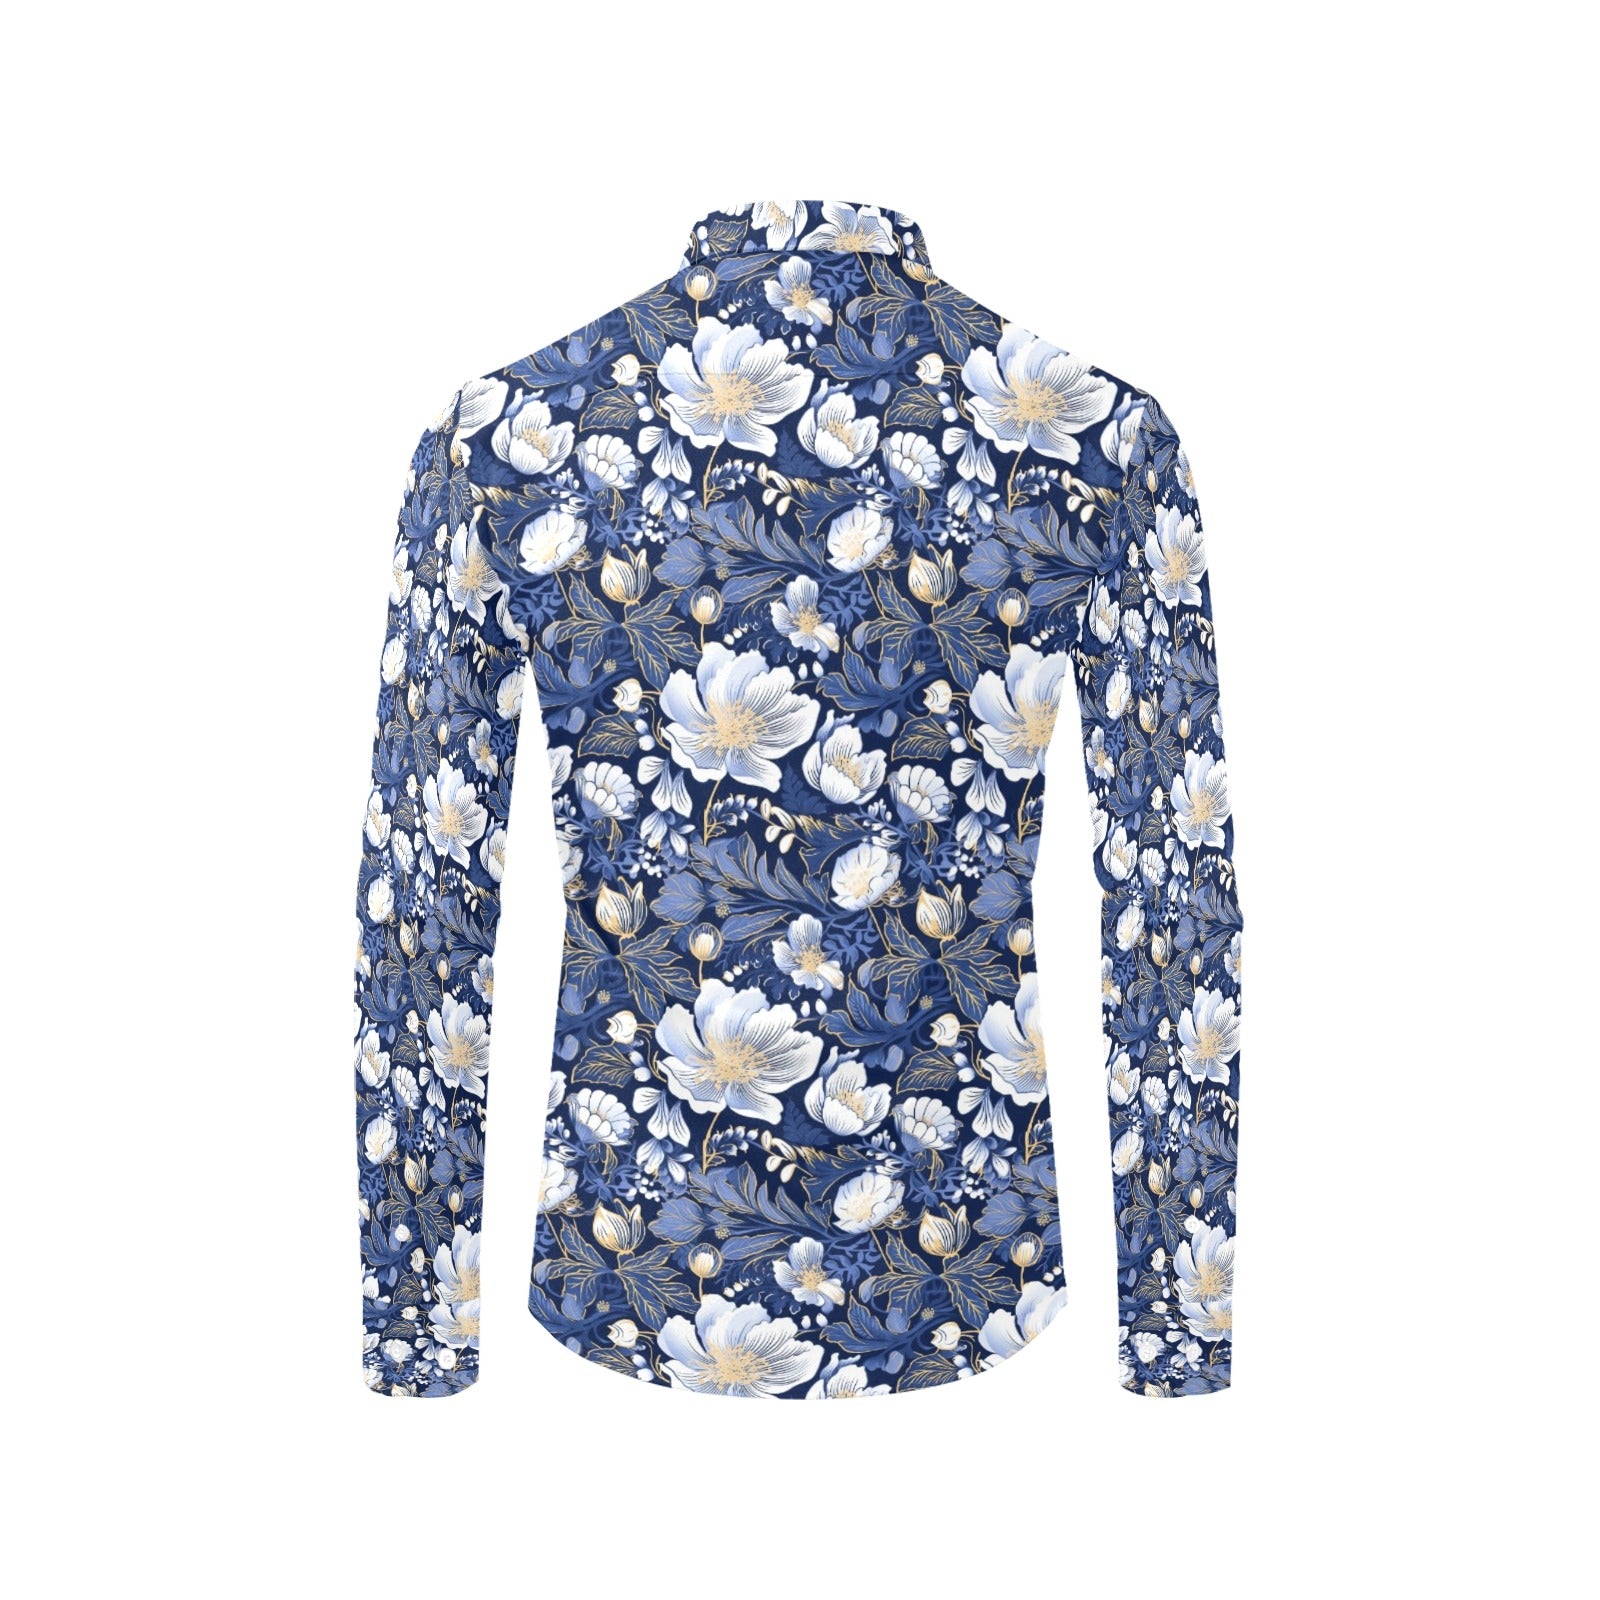 Blue White Gold Floral Long Sleeve Men Button Up Shirt, Flowers Print Buttoned Down Collar Casual Dress Shirt with Chest Pocket Starcove Fashion